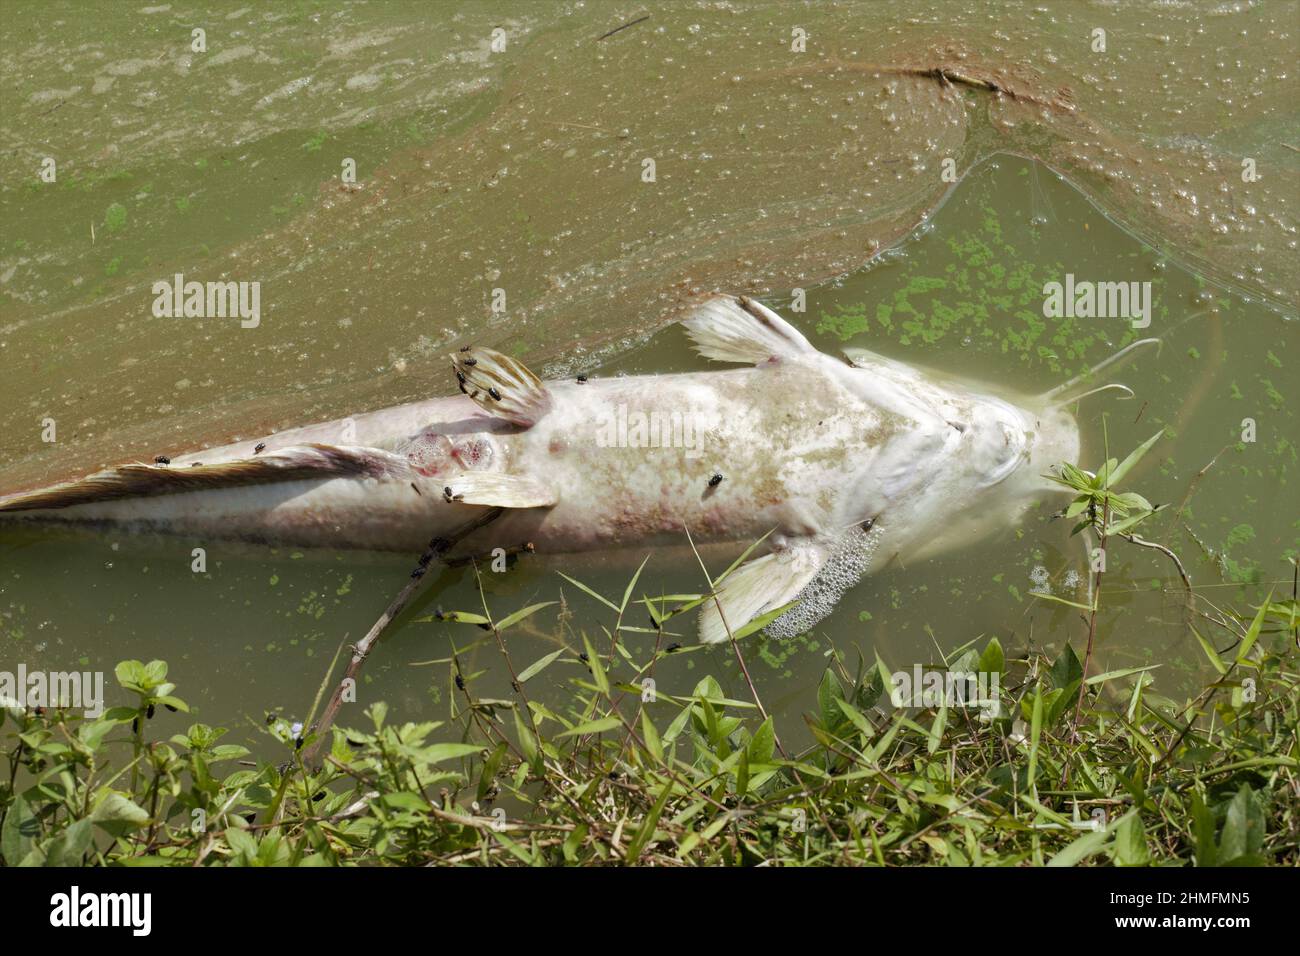 A dead catfish floating in the pond. Stock Photo